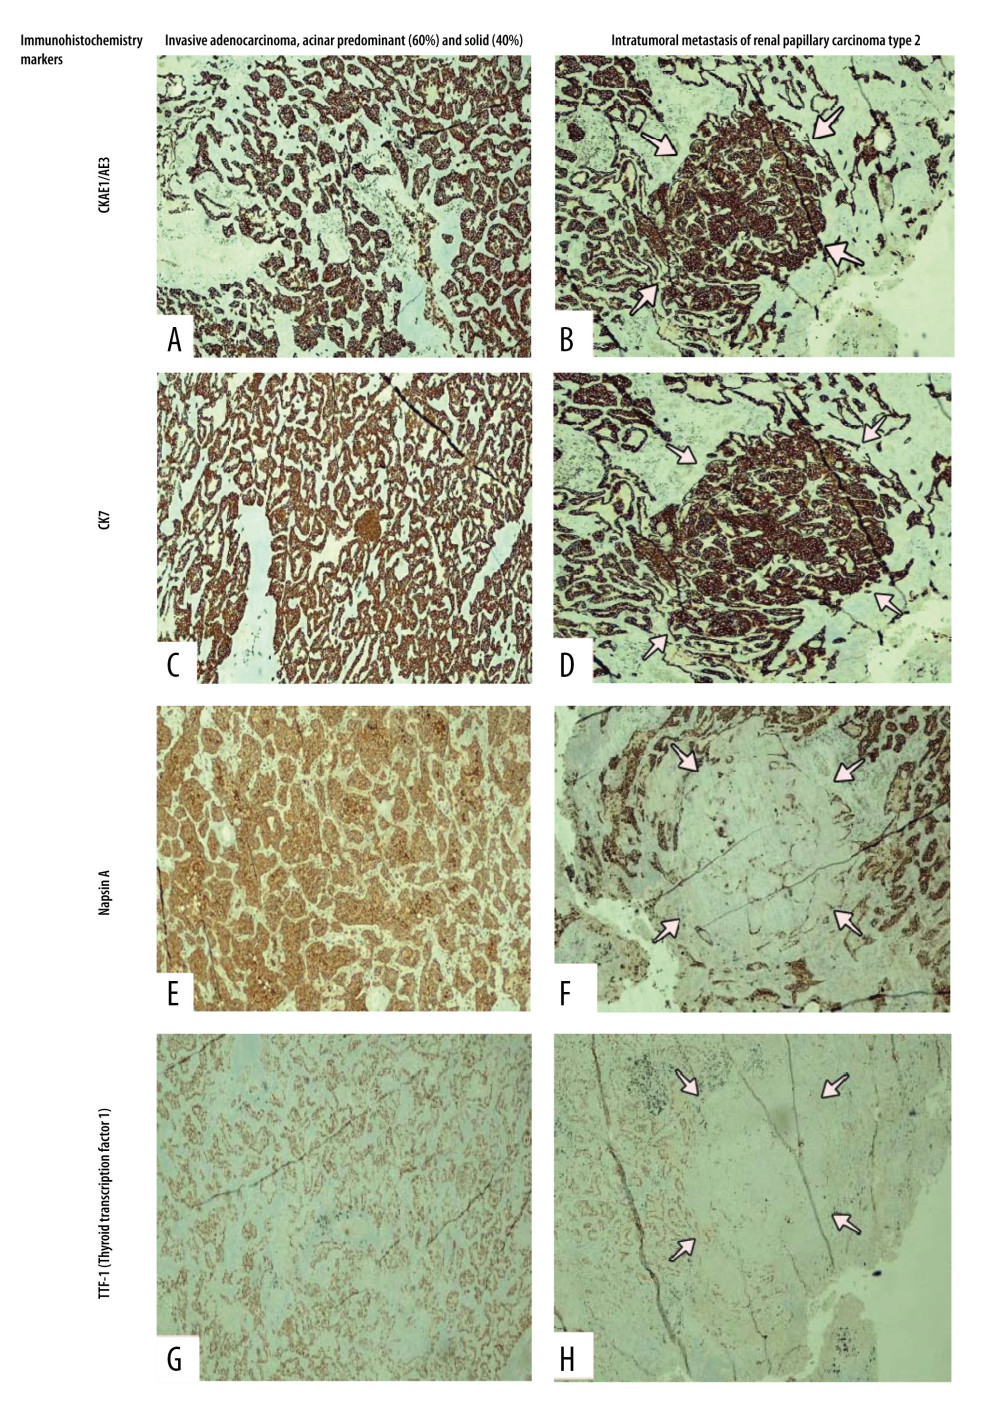 Immunohistochemical studies with positivity for CKAE1/AE3, CK7, Napsin A, and thyroid transcription factor 1 (TTF-1) in the acinar (60%) and solid (40%) lung adenocarcinoma. Positivity for CKAE1/AE3 and CK7, and negativity for Napsin A and TTF-1 for the metastasis from the papillary renal cell carcinoma (RCC) type 2 metastasis (arrows indicate intratumoral RCC metastasis): (A) CKAE1/AE3 in the lung adenocarcinoma (CKAE1/AE3 stain, 4× magnification). (B) CKAE1/AE3 in the intratumoral metastasis of the papillary RCC type 2 (CKAE1/AE3 stain, 10× magnification). (C) CK7 in the lung adenocarcinoma (CK7 stain, 4× magnification). (D) CK7 in the intratumoral metastasis of the papillary RCC type 2 (CK7 stain, 10× magnification). (E) Napsin A in the lung adenocarcinoma (napsin A stain, 4× magnification). (F) Napsin A in the intratumoral metastasis of the papillary RCC type 2 (napsin A stain, 10× magnification). (G) TTF-1 in the lung adenocarcinoma (TTF1 stain, 4× magnification). (H) TTF-1 in the intratumoral metastasis of the papillary RCC type 2 (TTF-1 stain, 10× magnification).